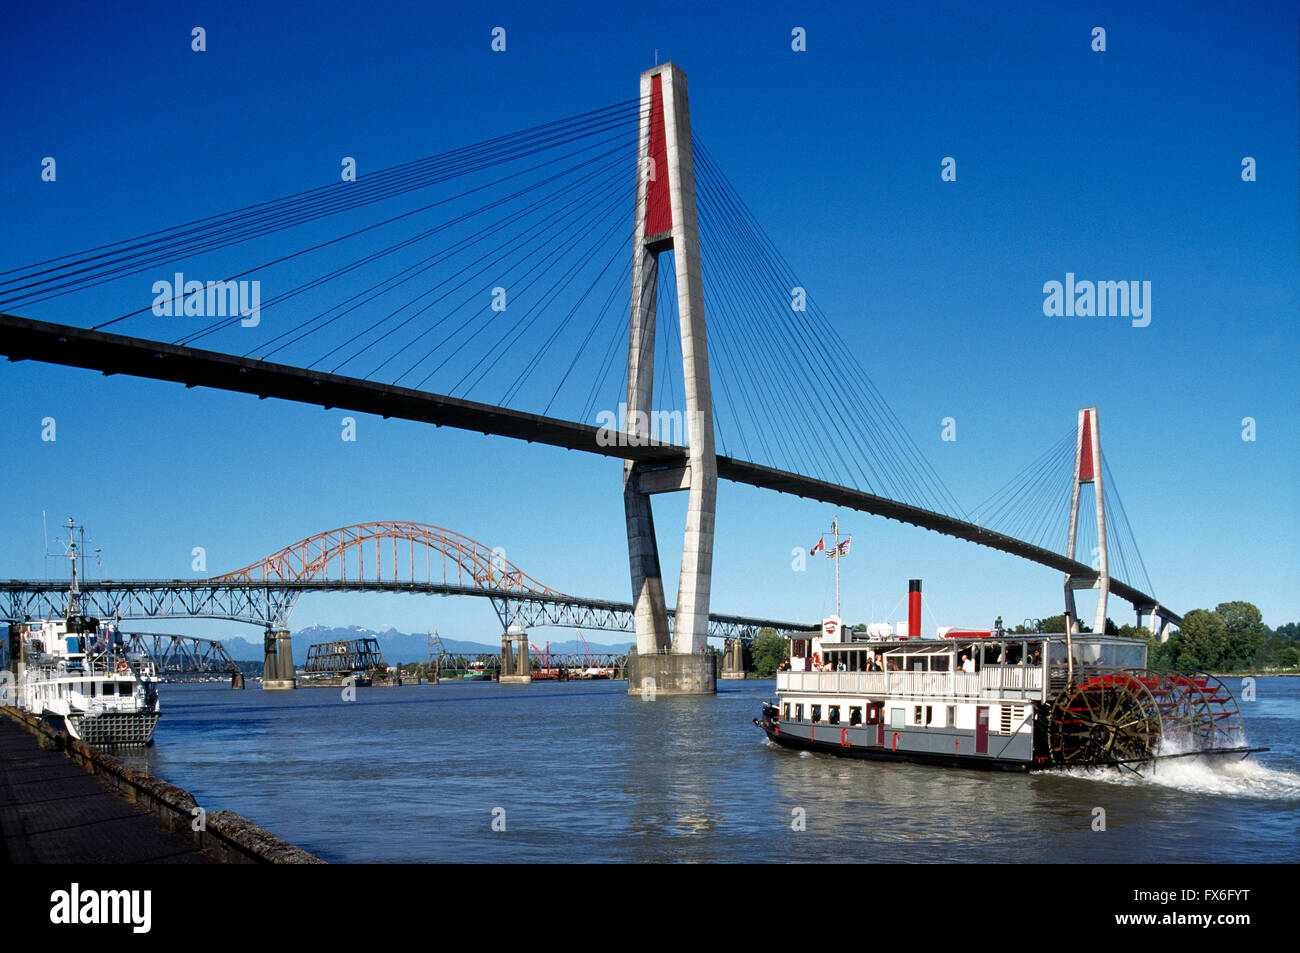 Paddlewheeler Riverboat Tour on Fraser River, New Westminster, British Columbia, Canada - SkyBridge and Pattullo Bridge behind Stock Photo